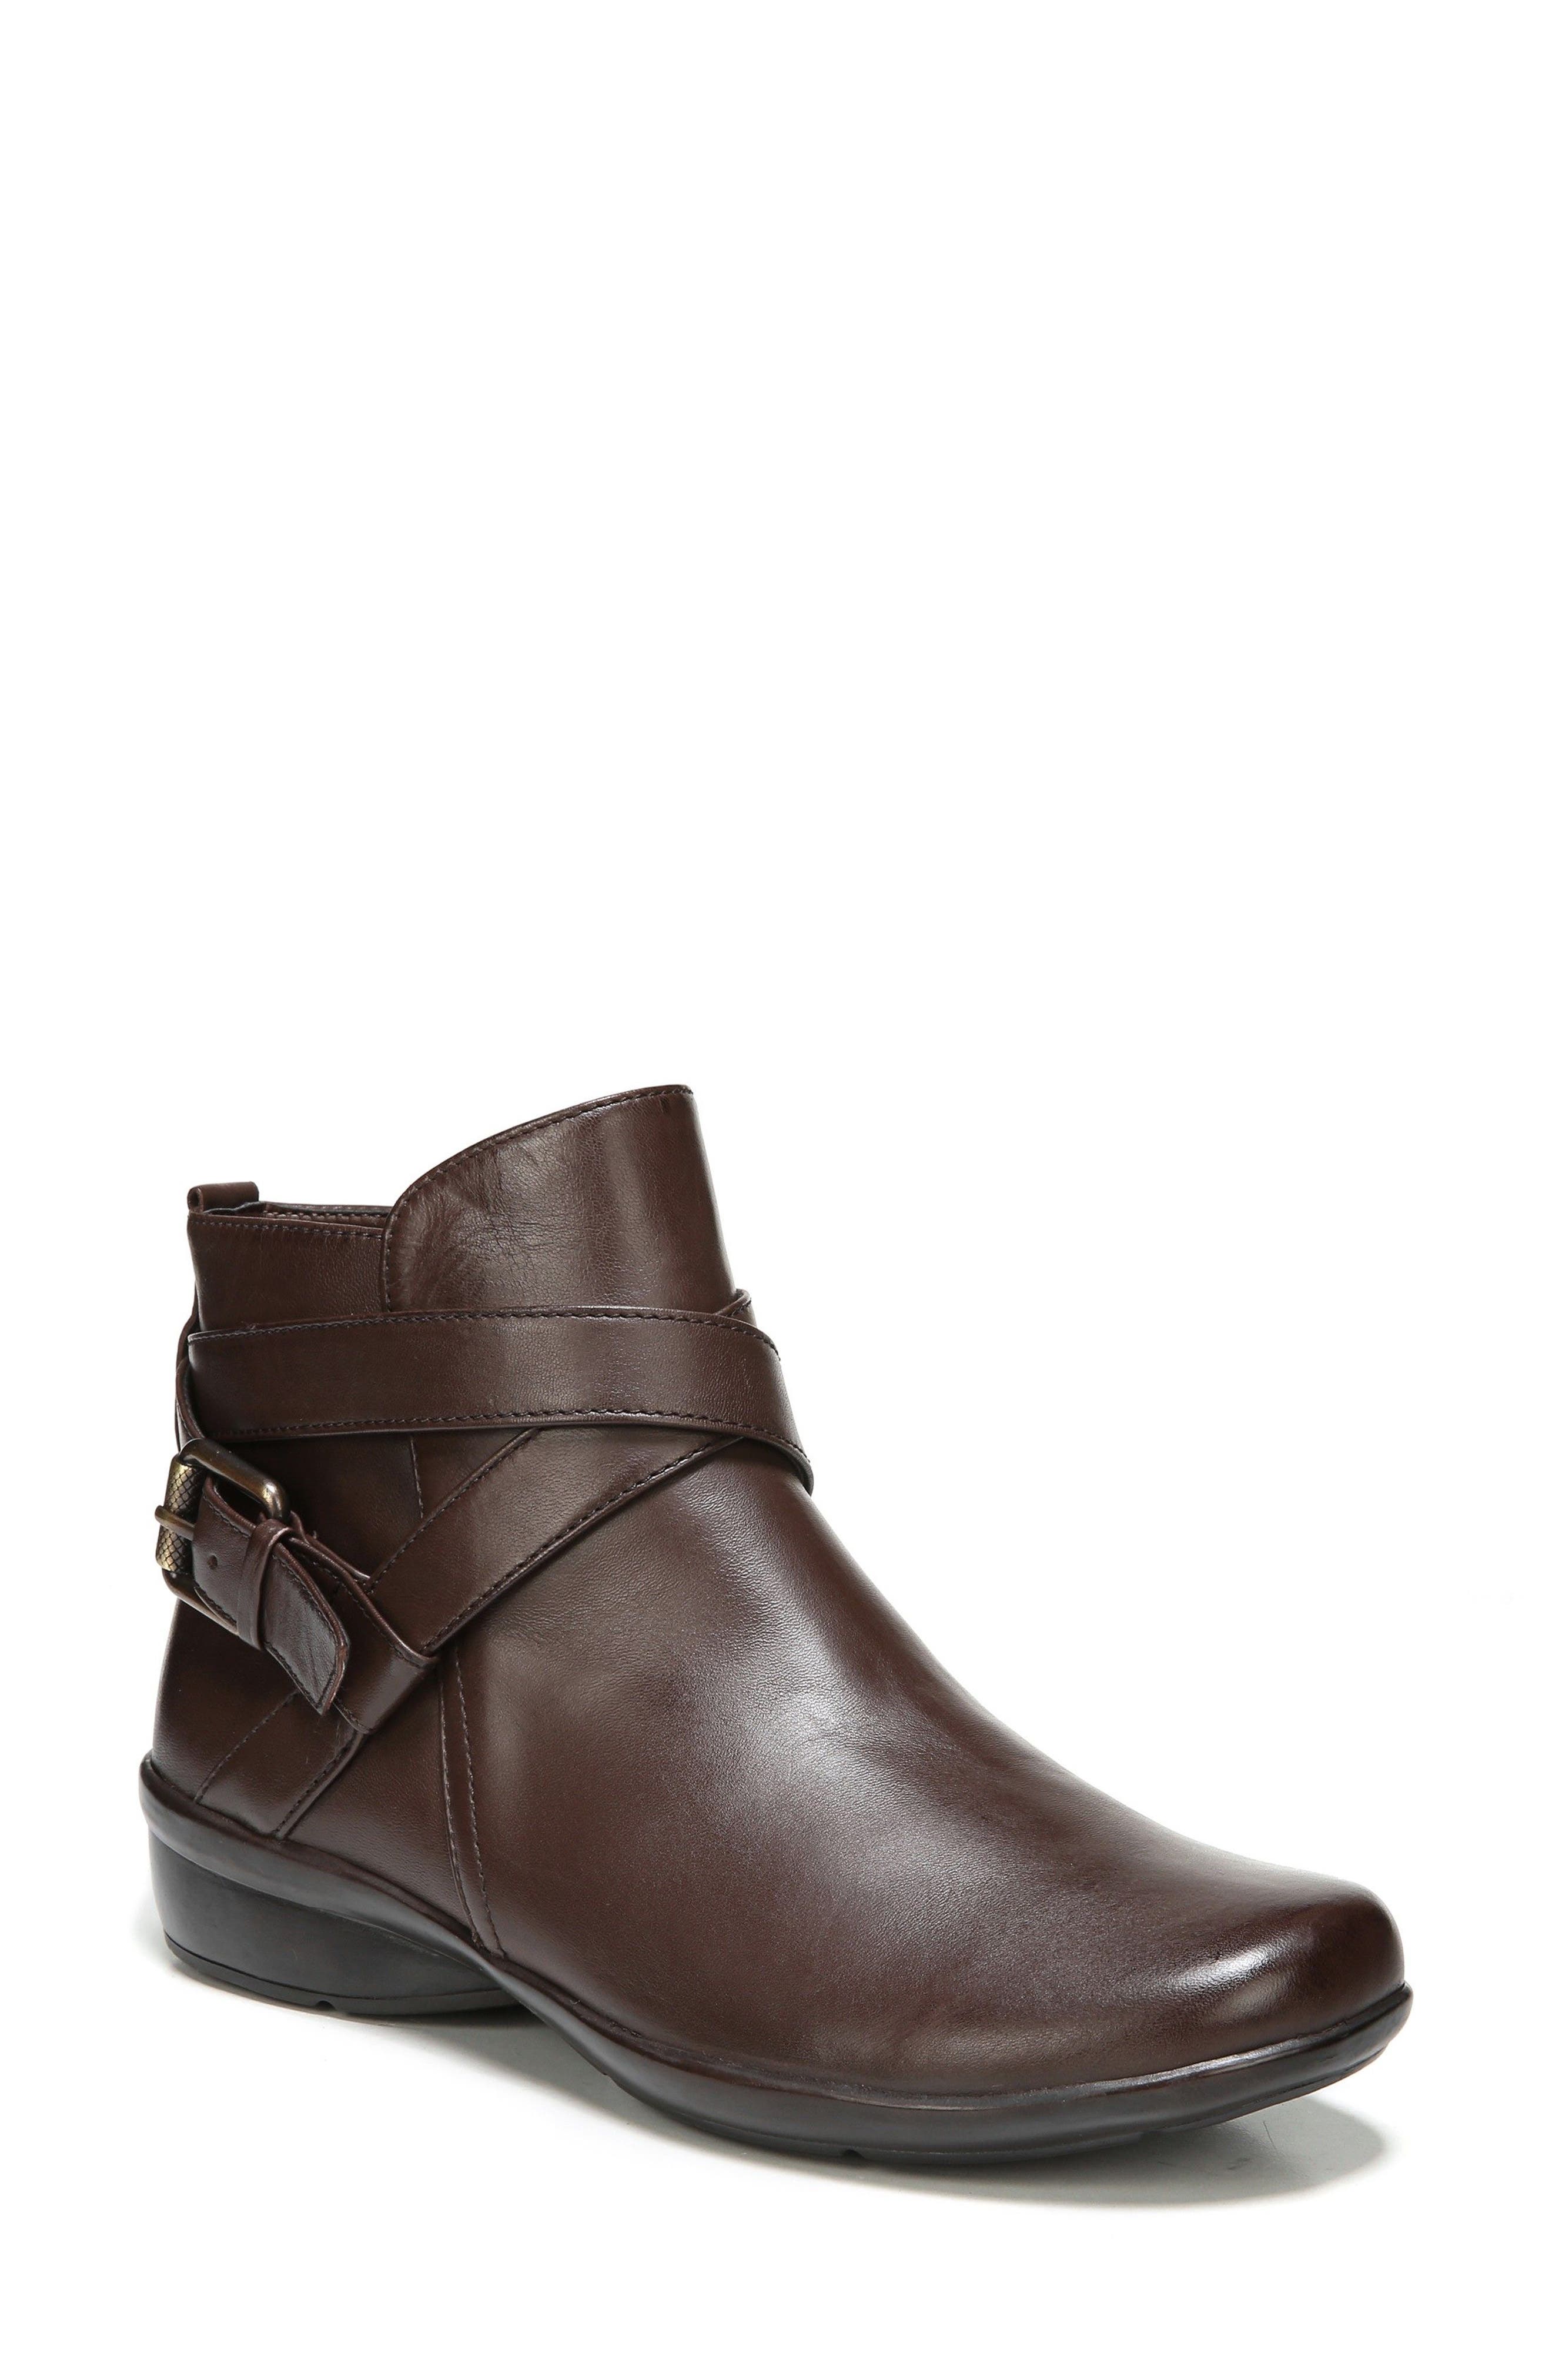 naturalizer cassandra leather ankle boots